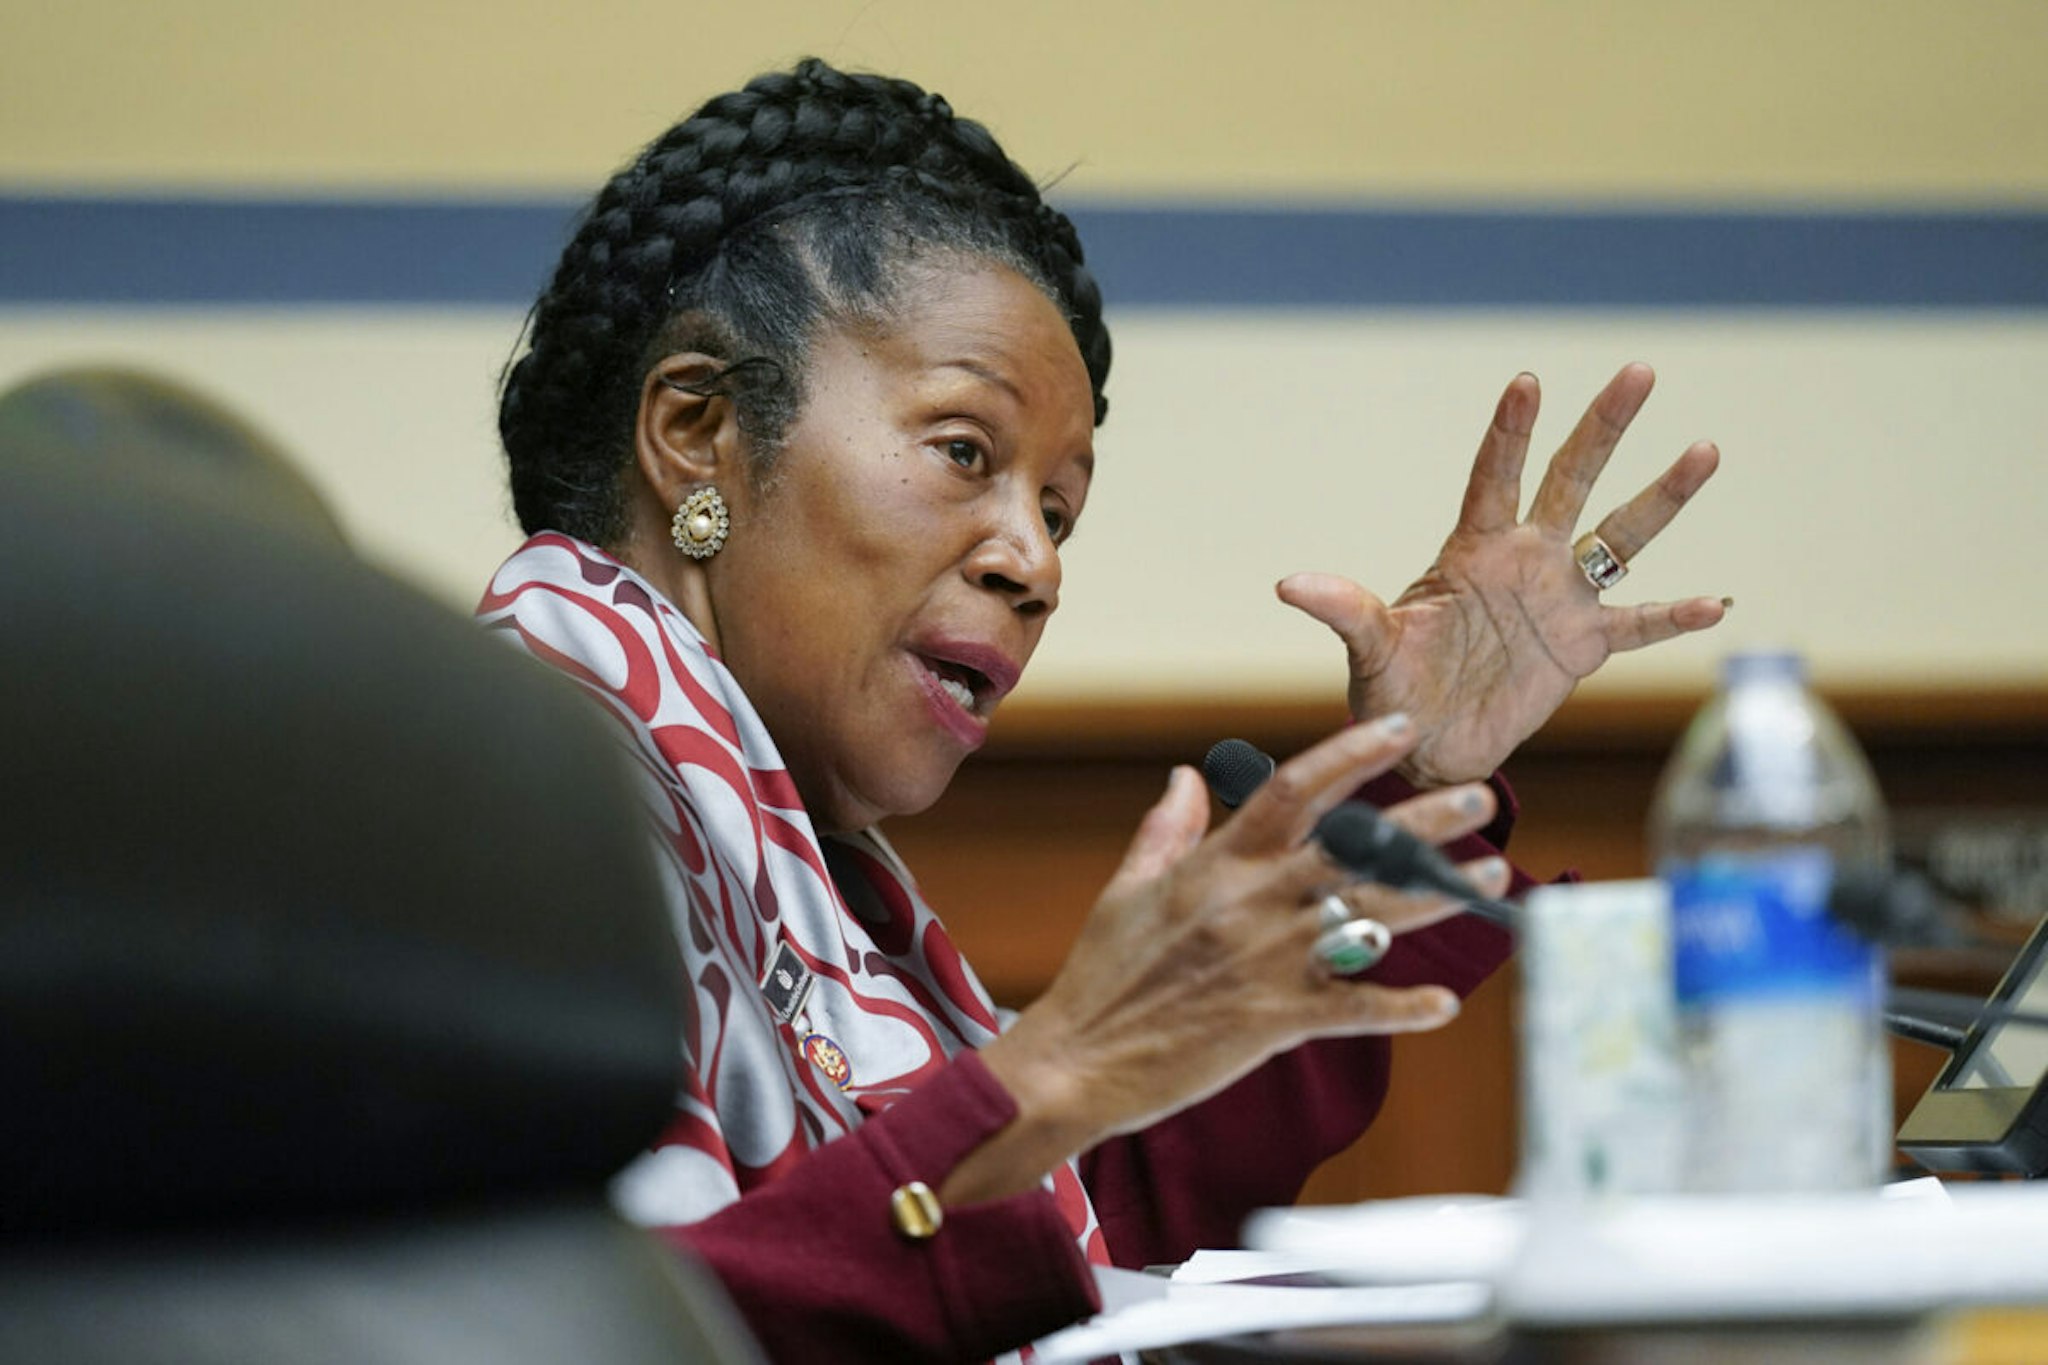 Rep. Sheila Jackson Lee (D-TX) speaks during a House Committee on Oversight and Reform hearing on gun violence on June 8, 2022 in Washington, DC.